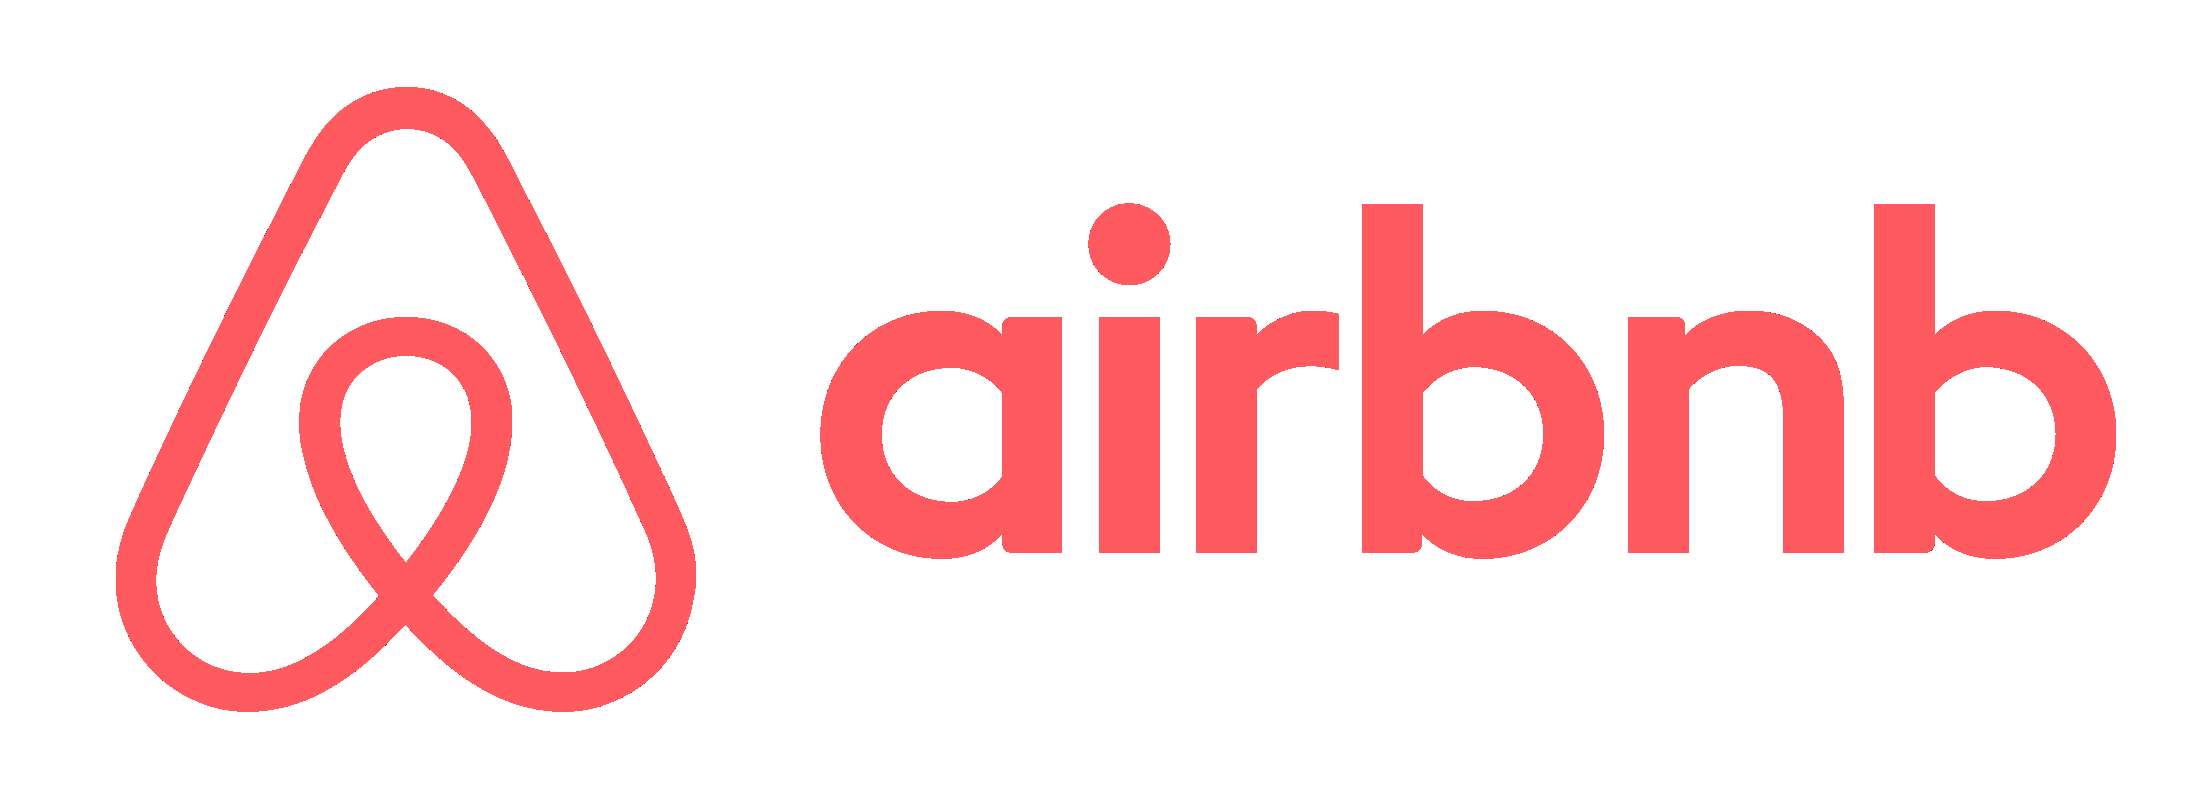  Airbnb  Logo Airbnb  Symbol Meaning  History and Evolution